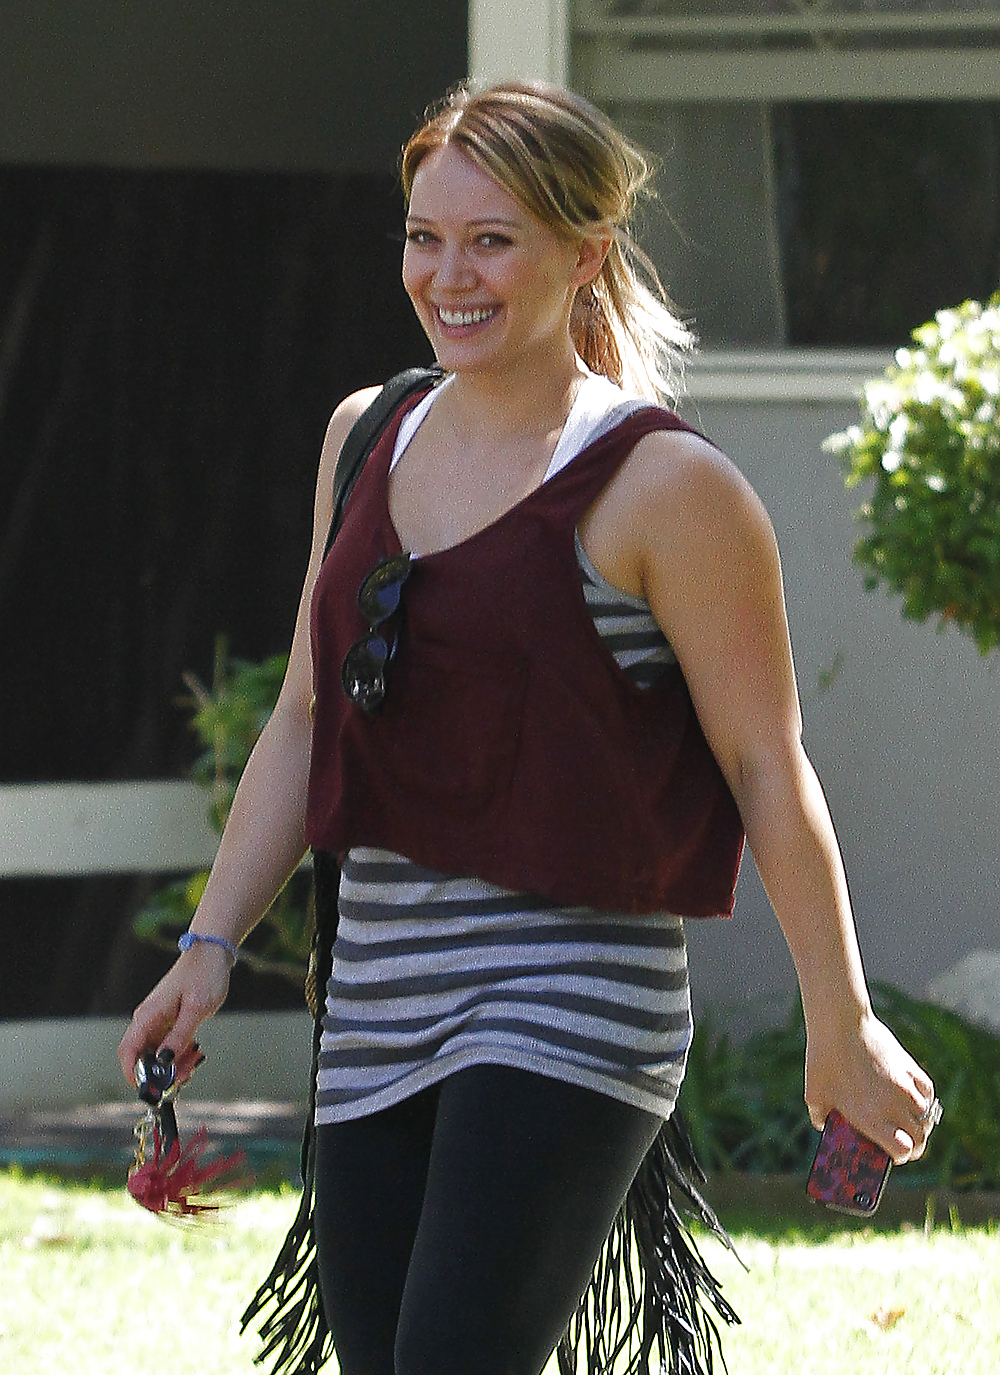 Hilary Duff Goes To Yoga Class Looking Happy Hollywood #7464051